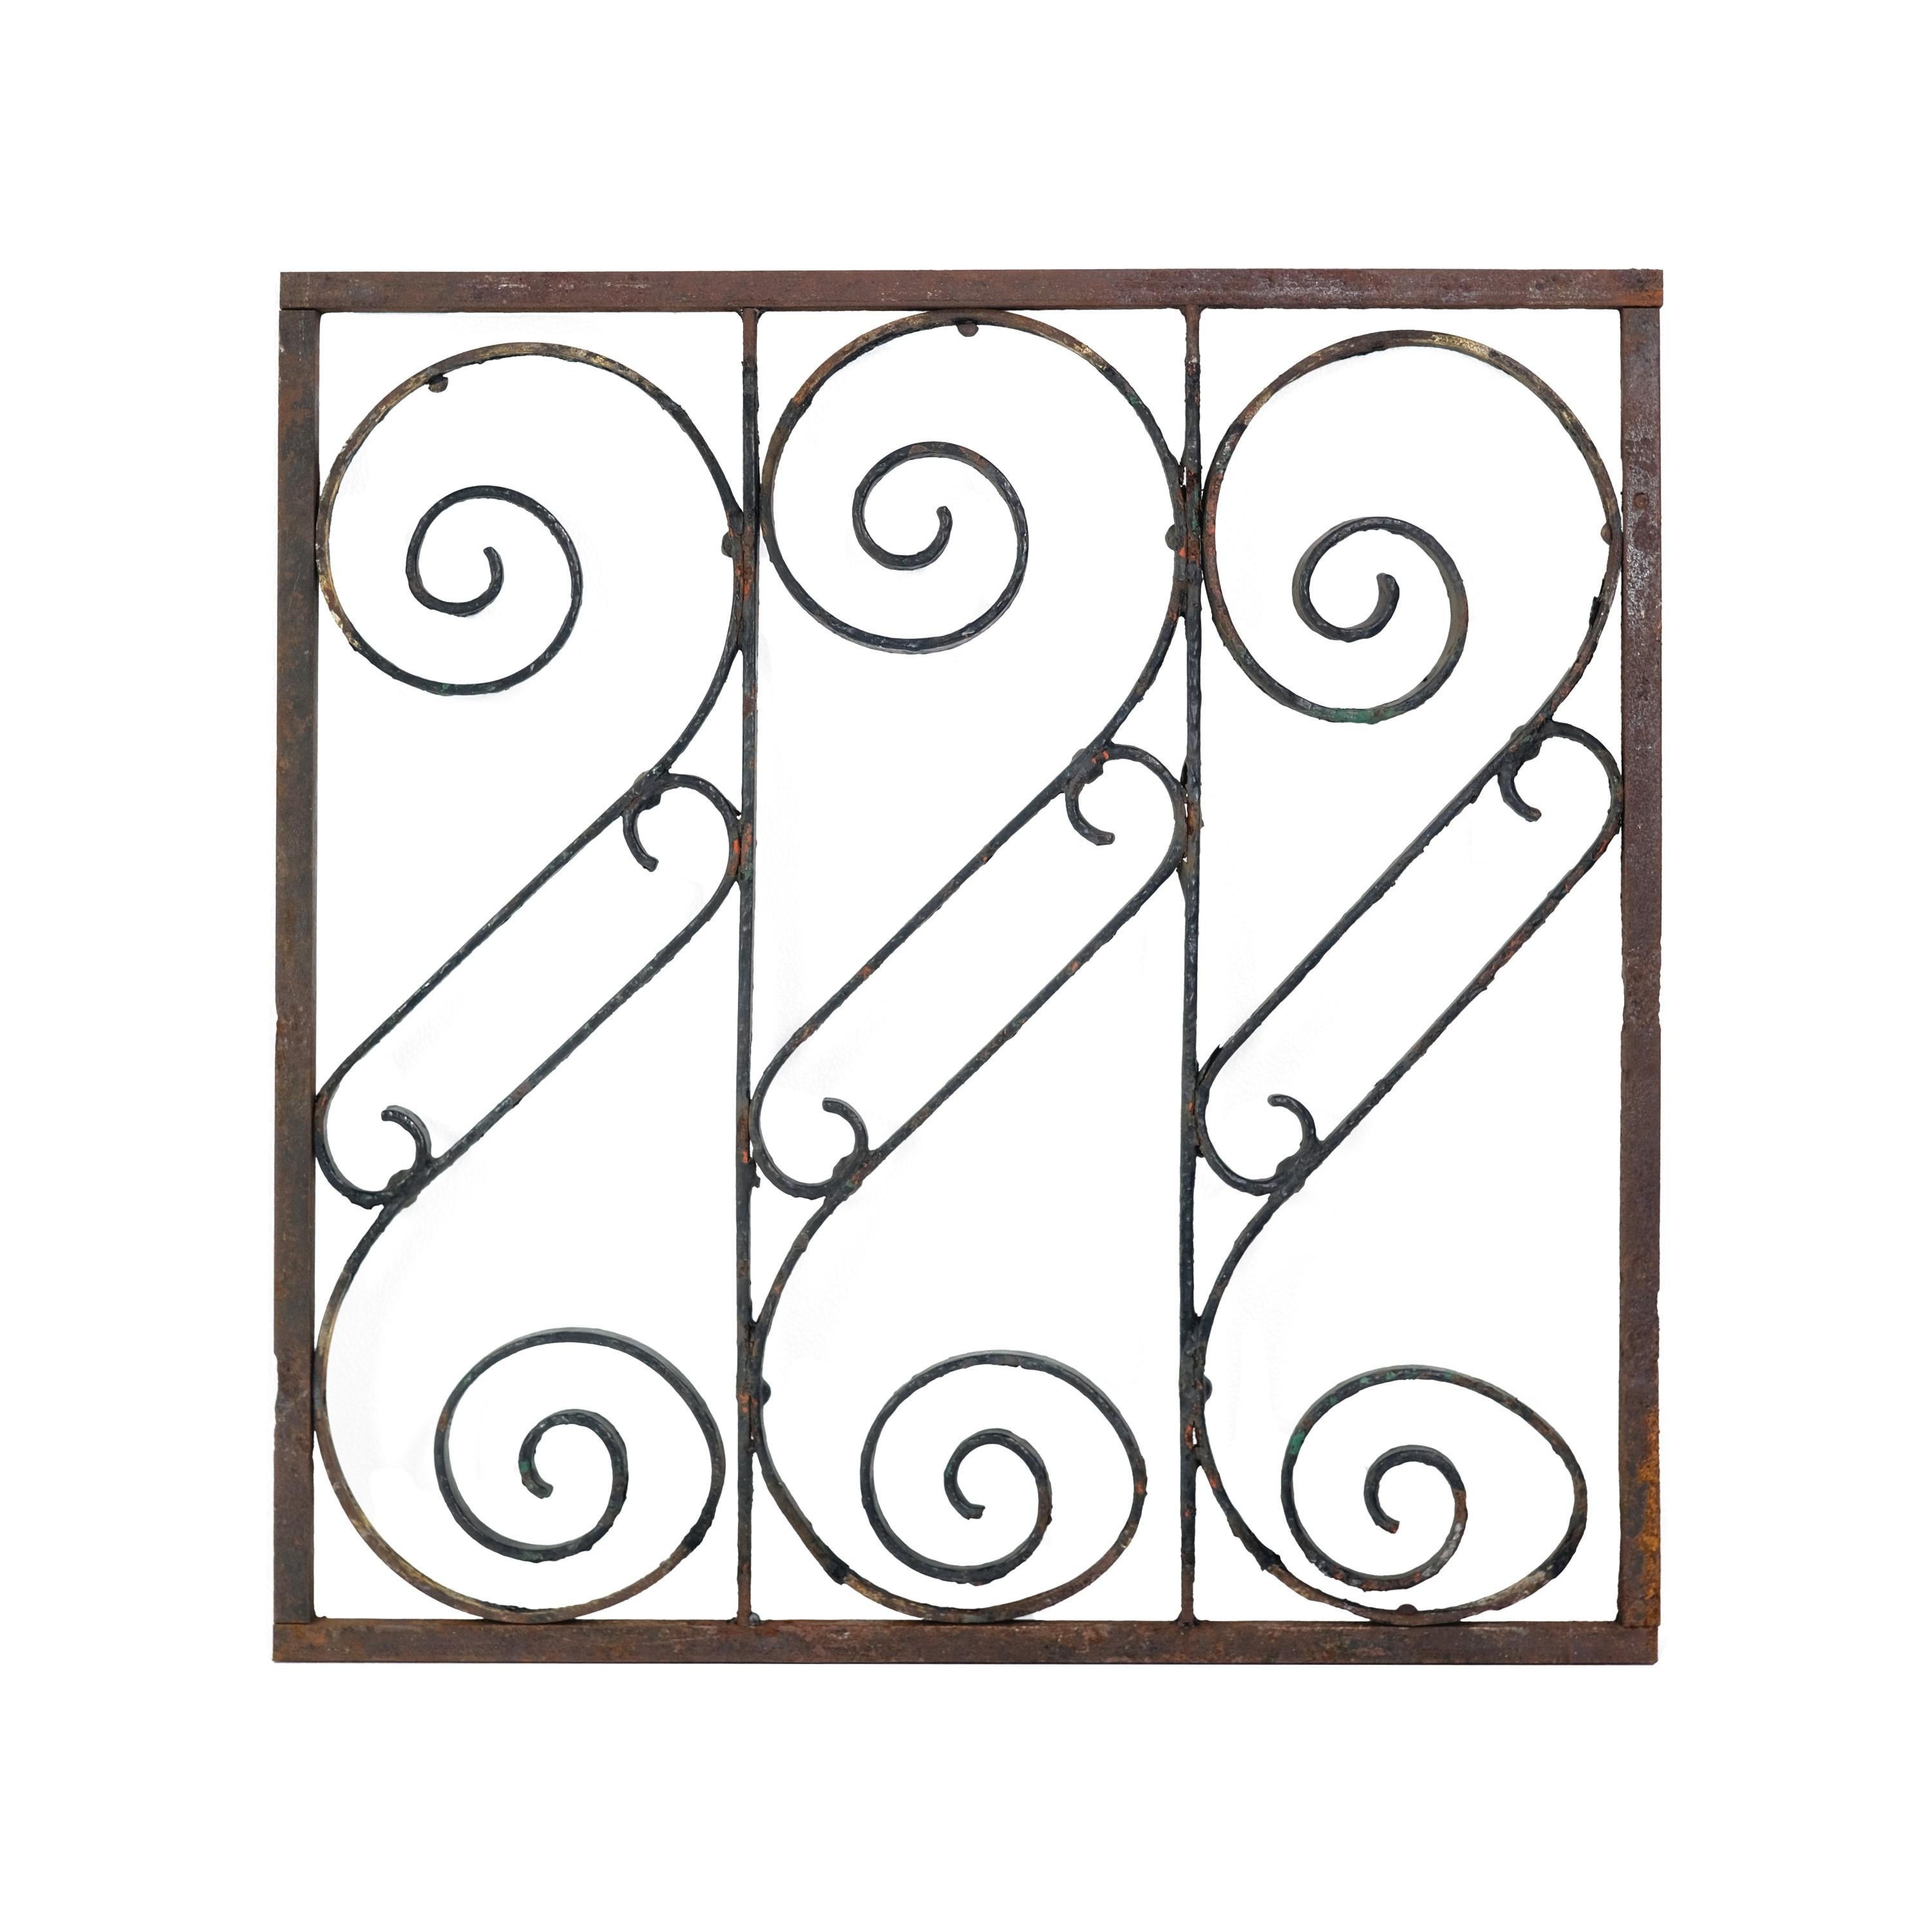 Wrought Iron S Curved Design Decorative Panel - Antique In Good Condition For Sale In New York, NY